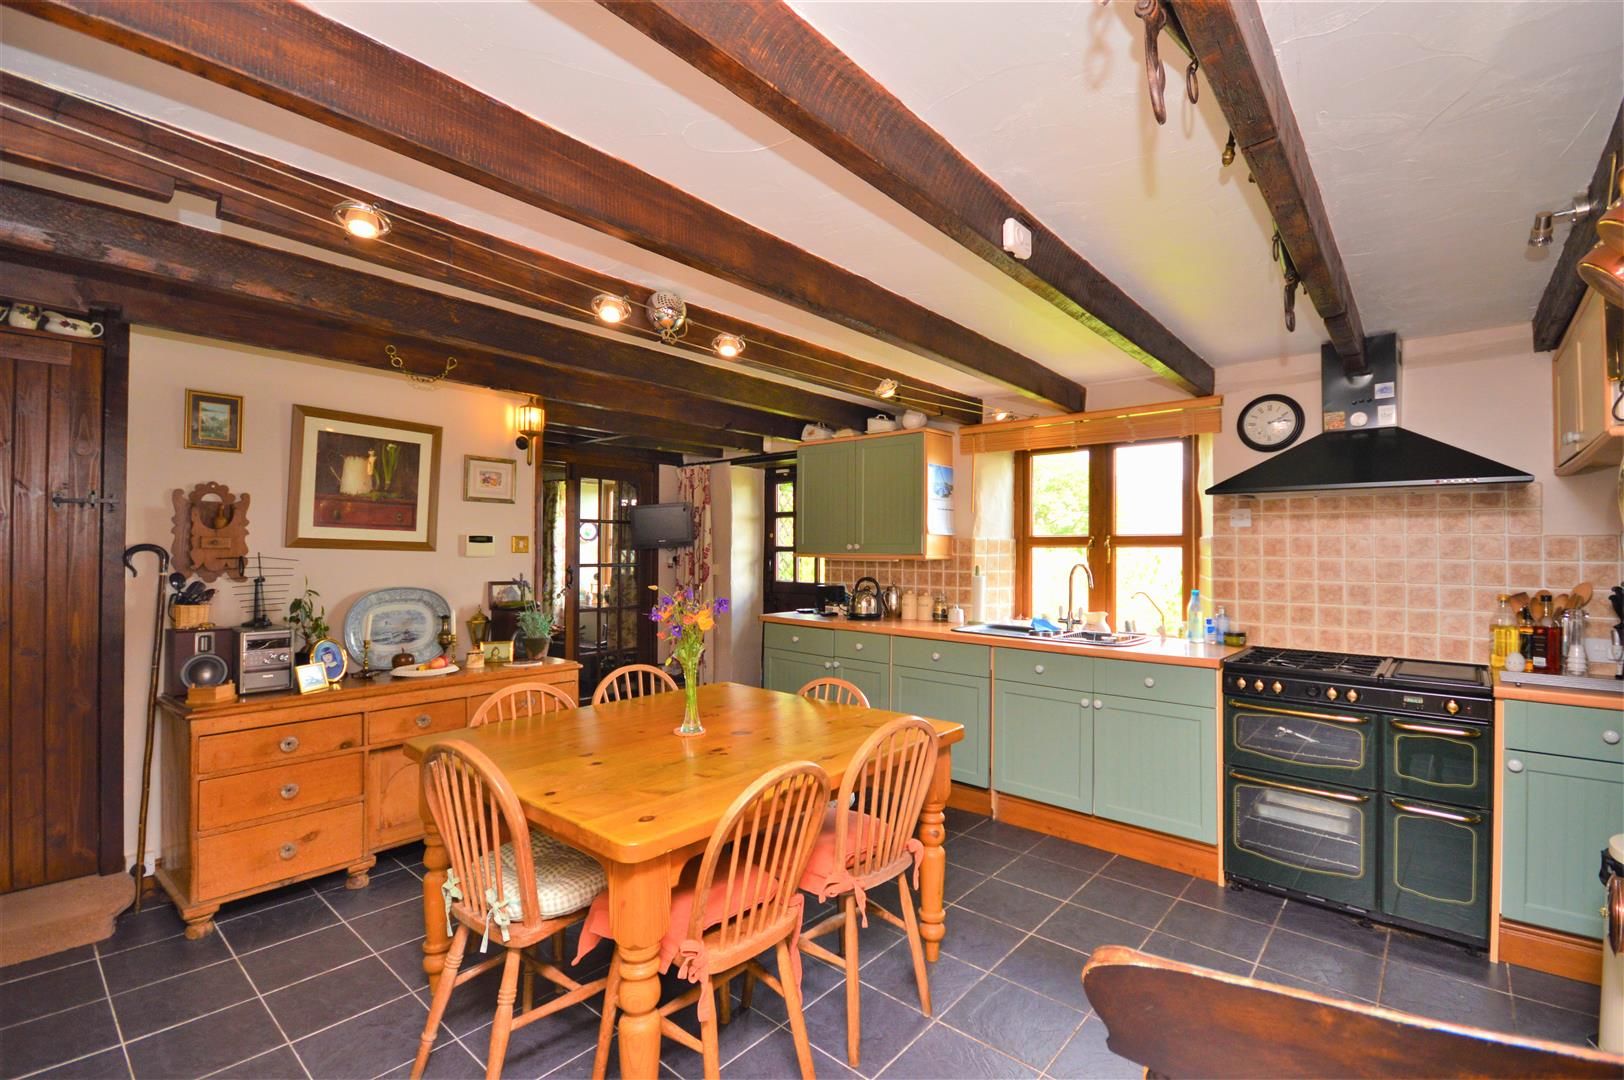 3 bed detached for sale in Cwmdu  - Property Image 8